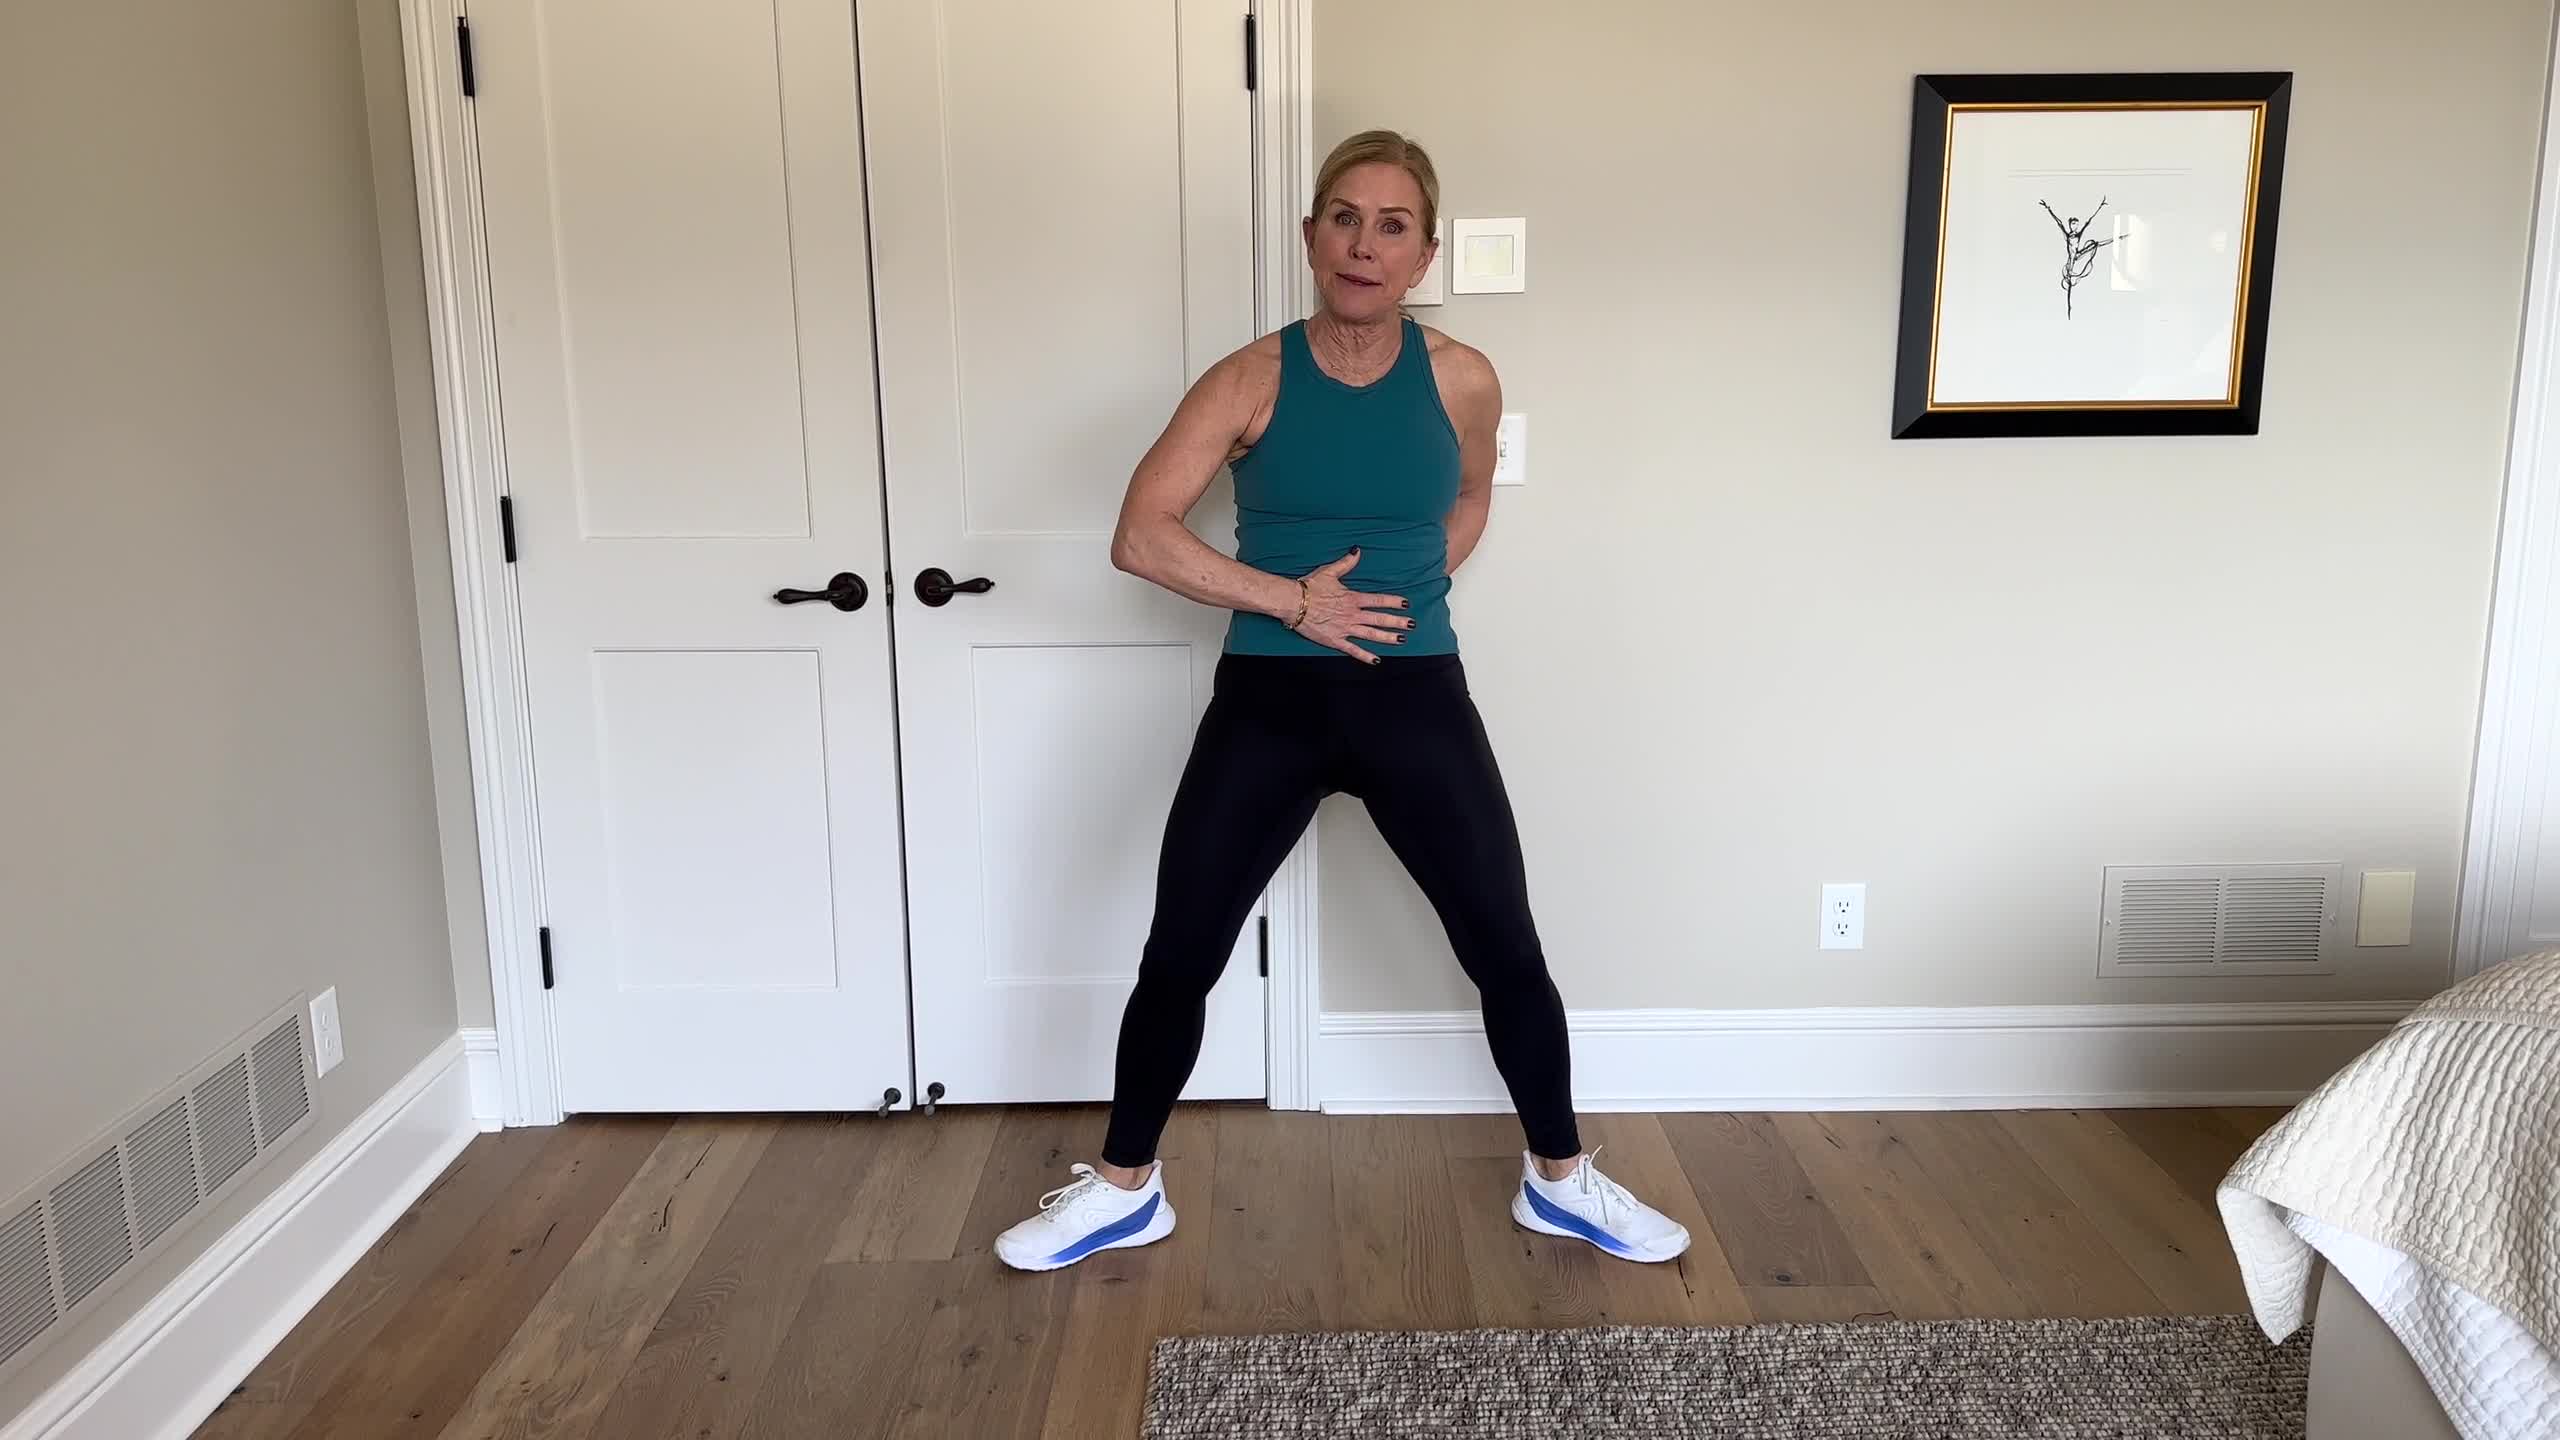 10-Minute Belly and Butt Workout